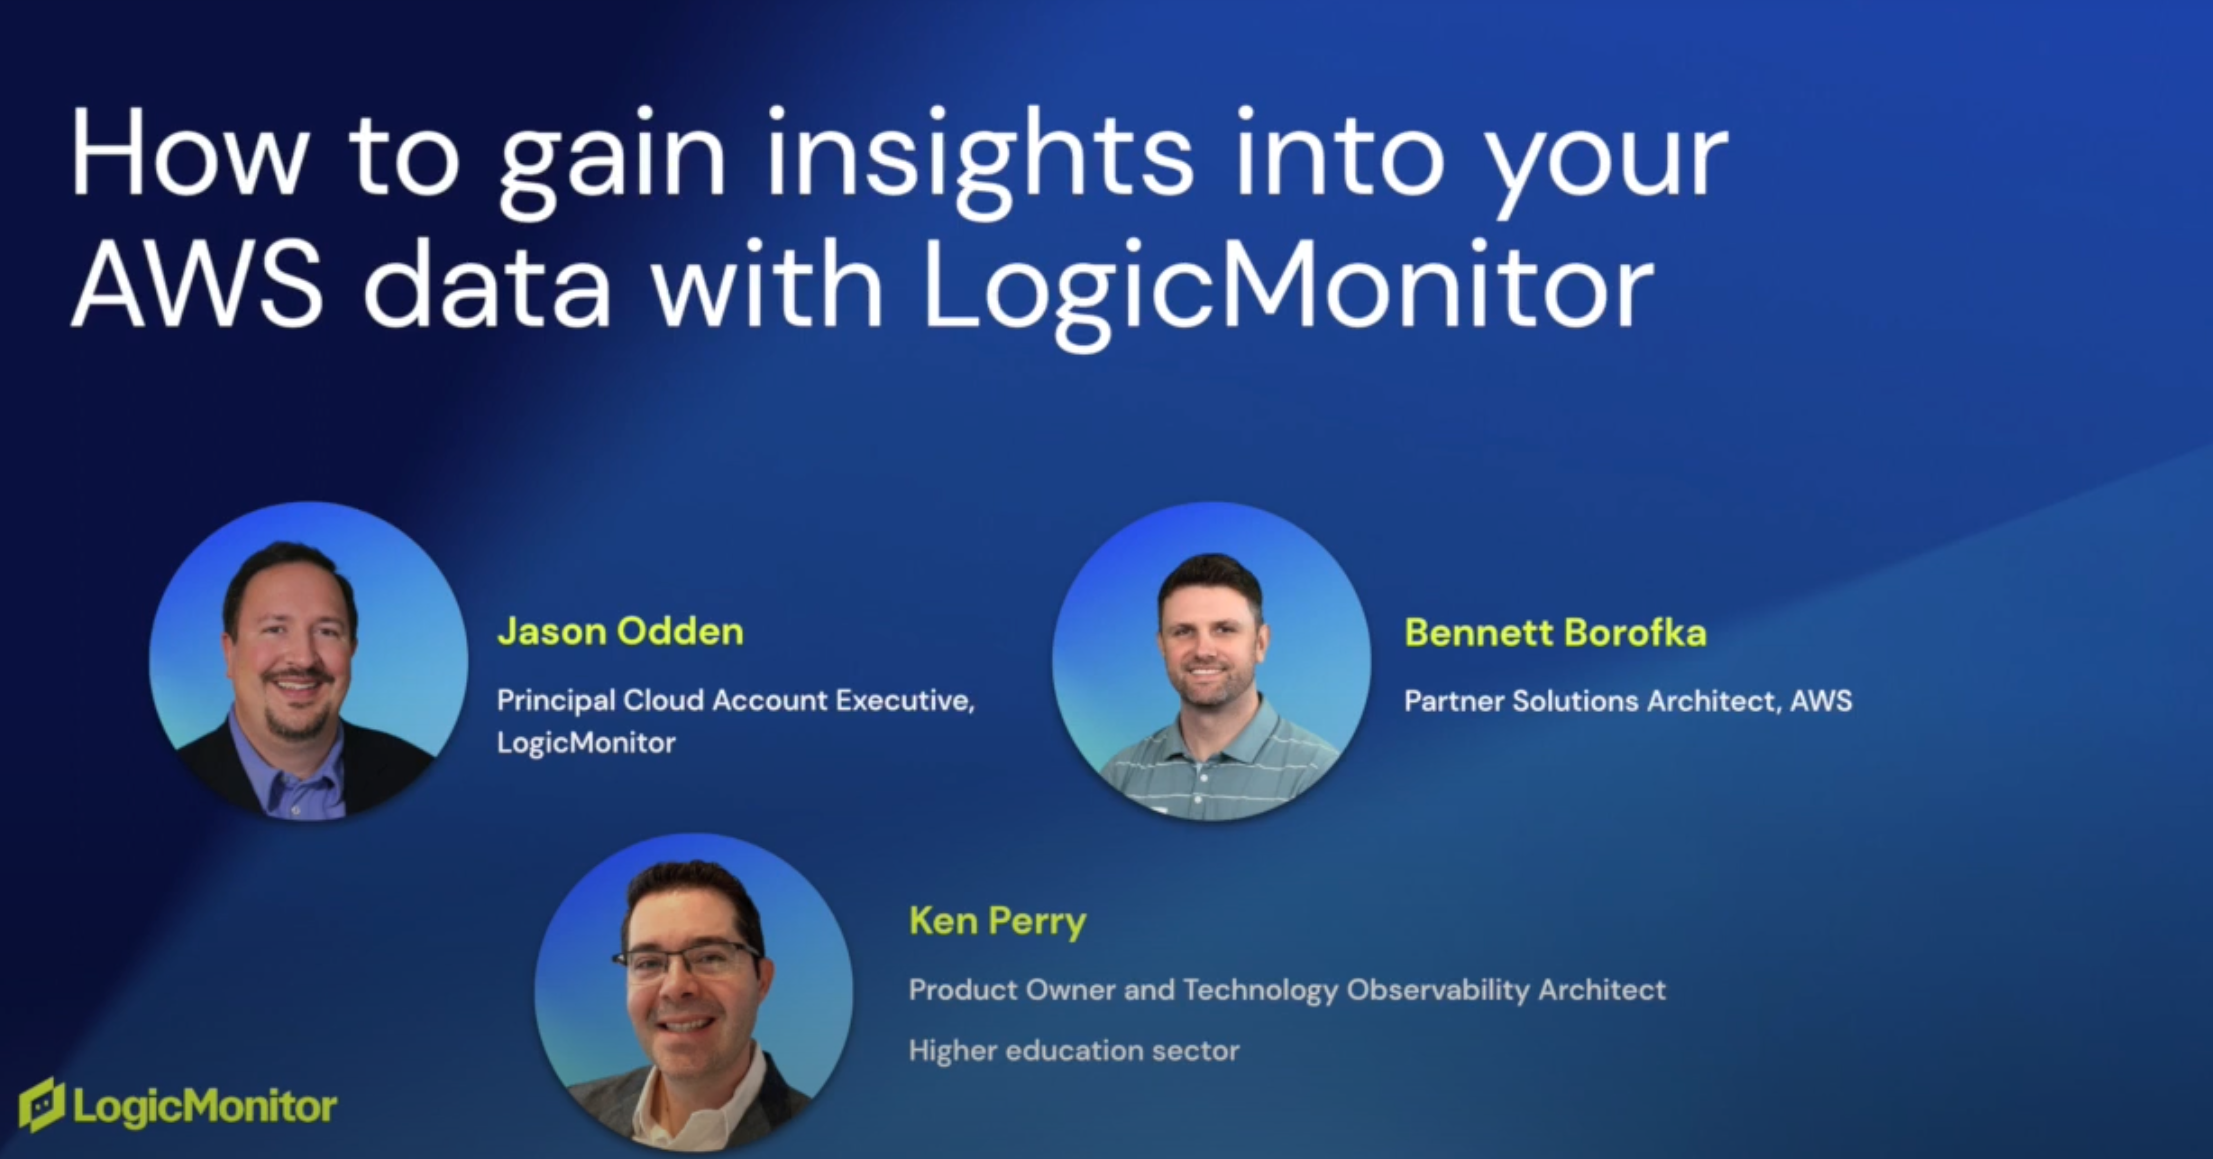 How to gain insights into your AWS data with LogicMonitor